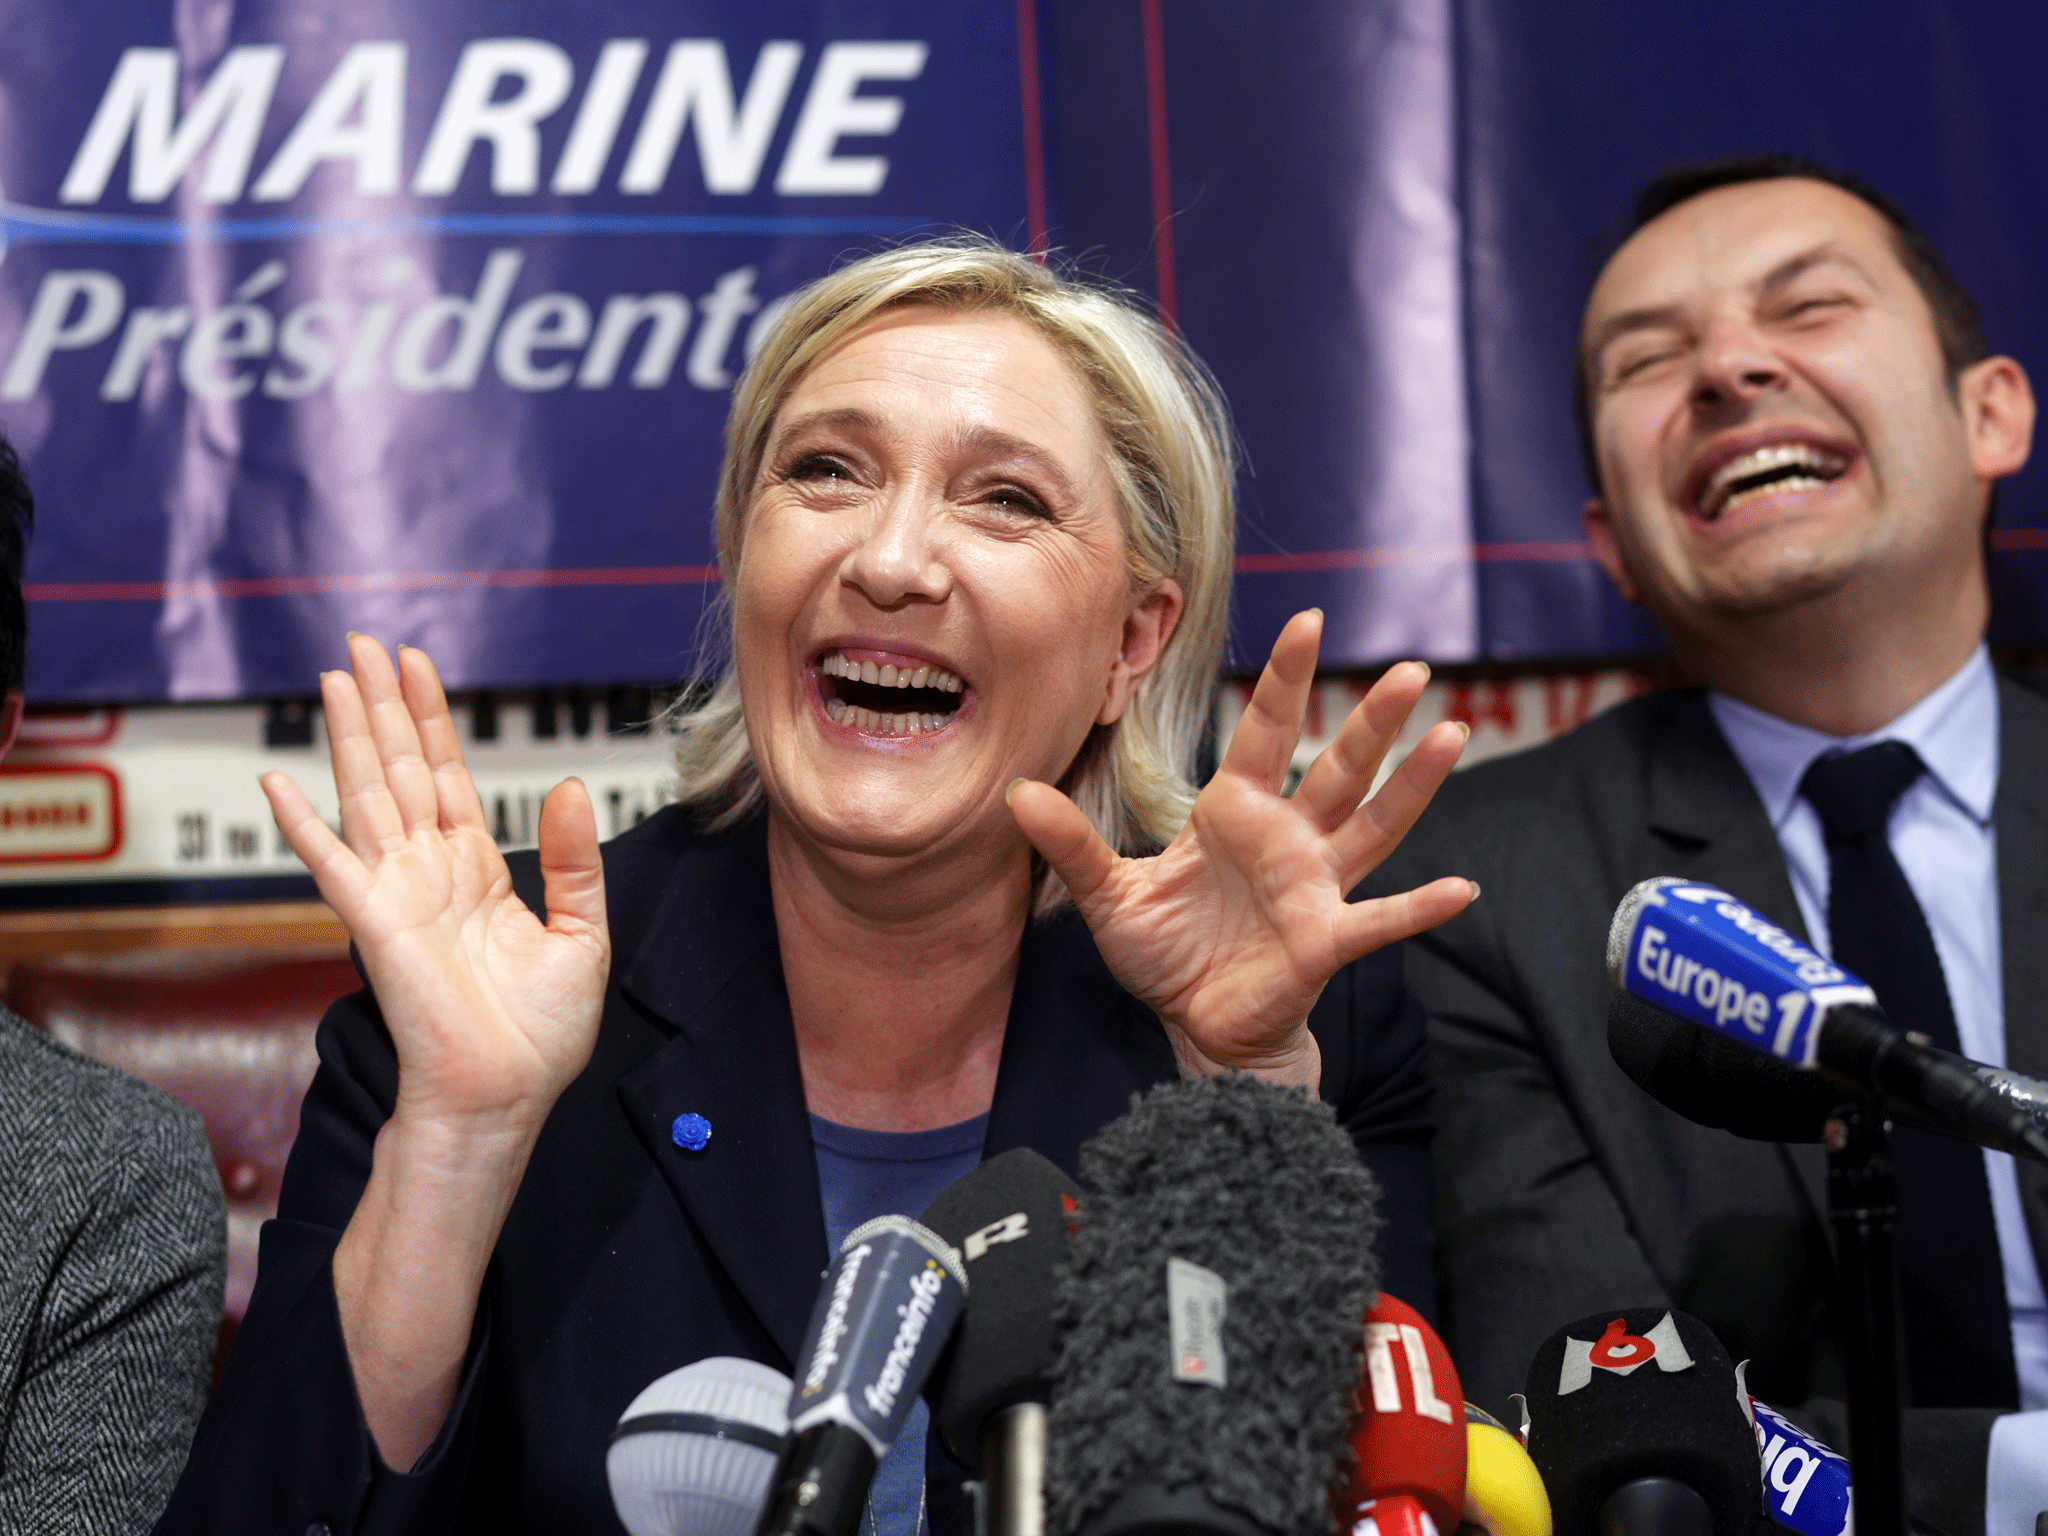 Marine Le Pen, pictured at a Lille press conference, is polling at 26 per cent